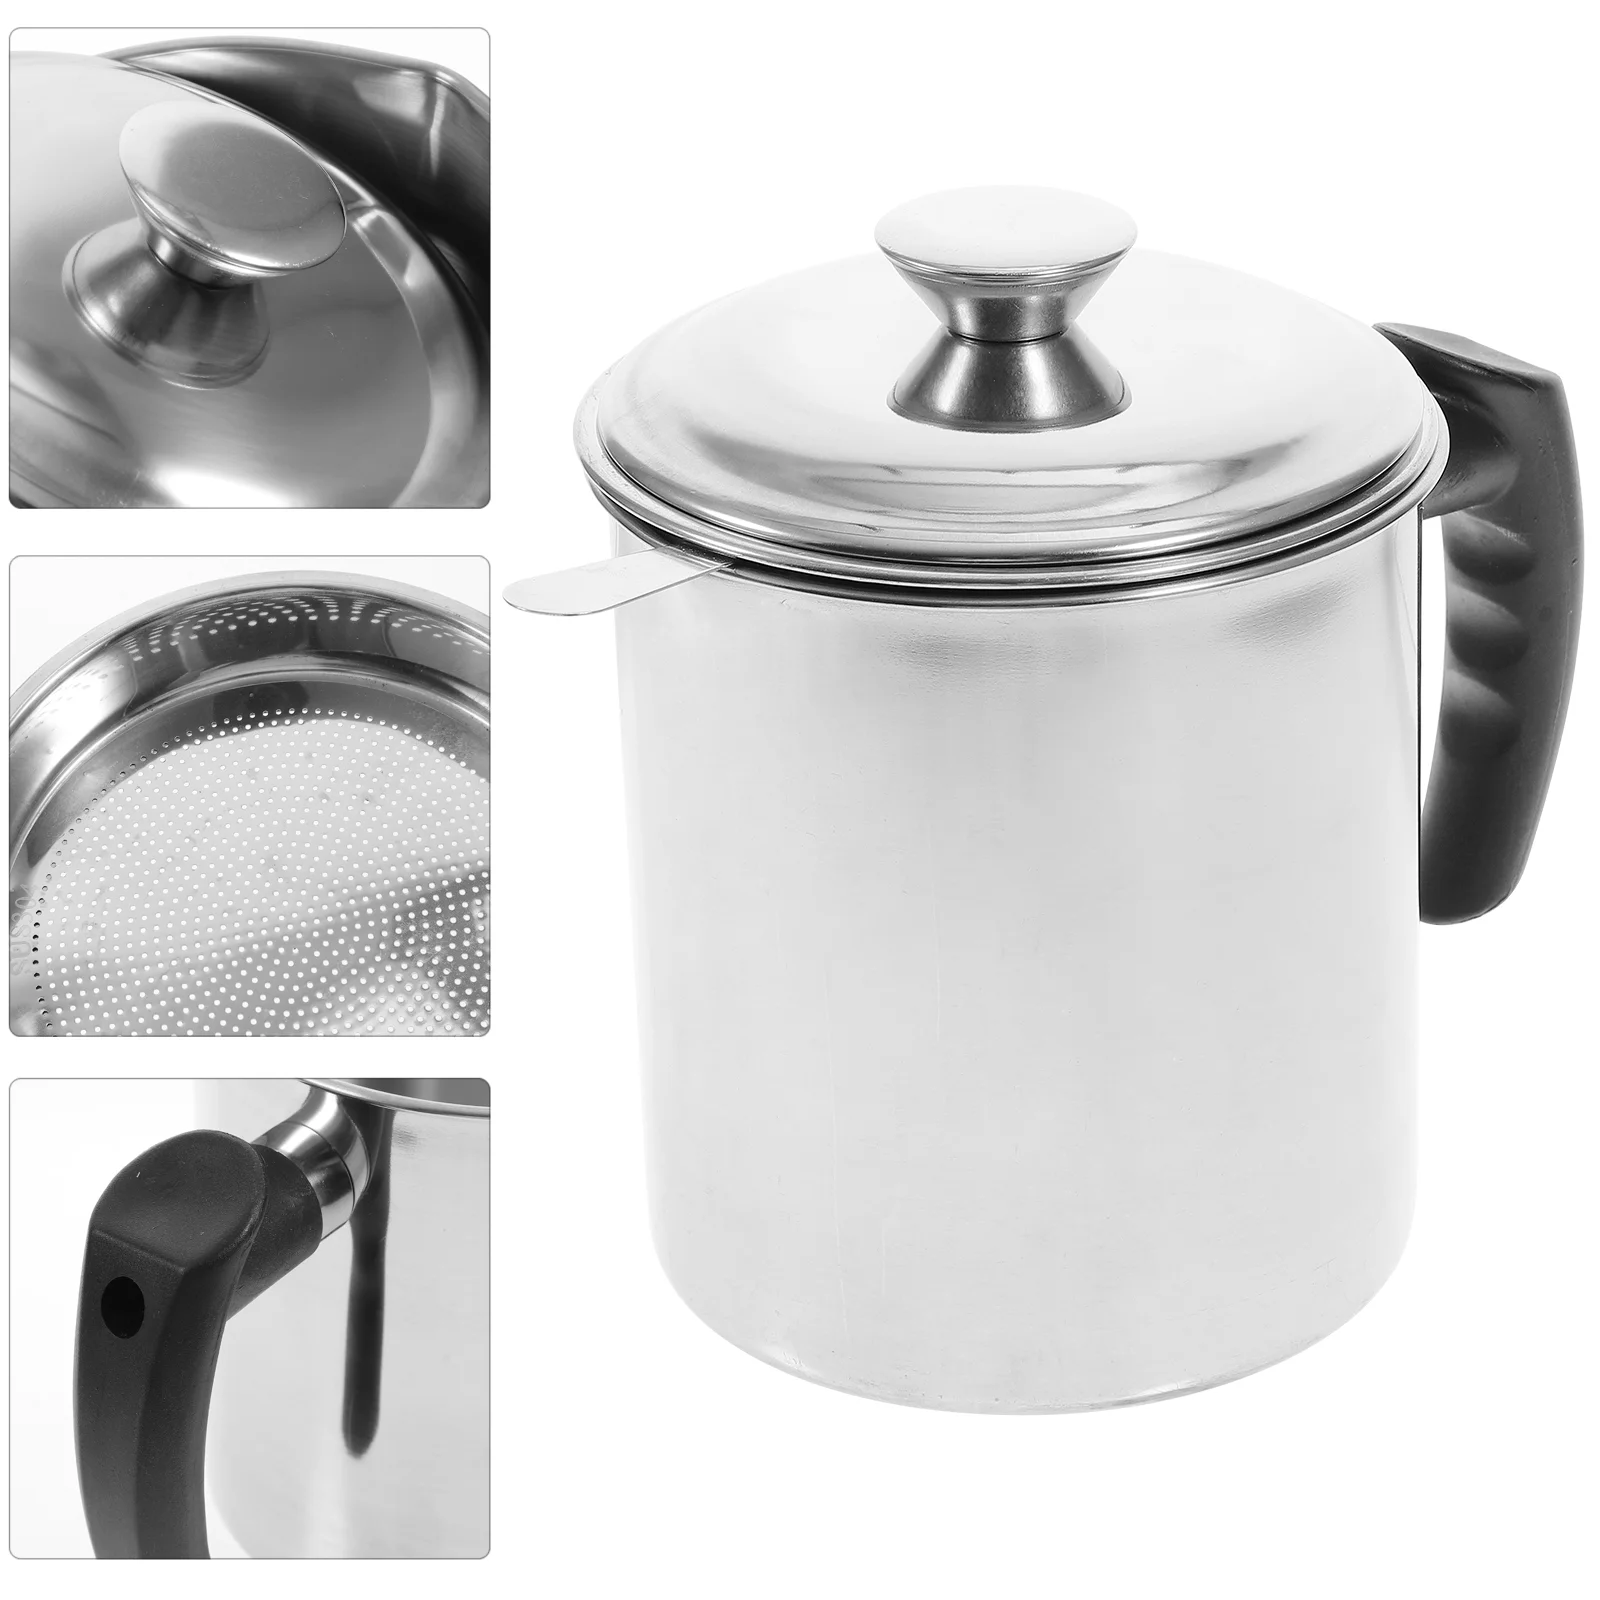 

Oil Grease Strainer Can Pot Frying Fat Bacon Kitchen Storage Mesh Fine Filter Container Seperator Sifter Strainegrease Keeper